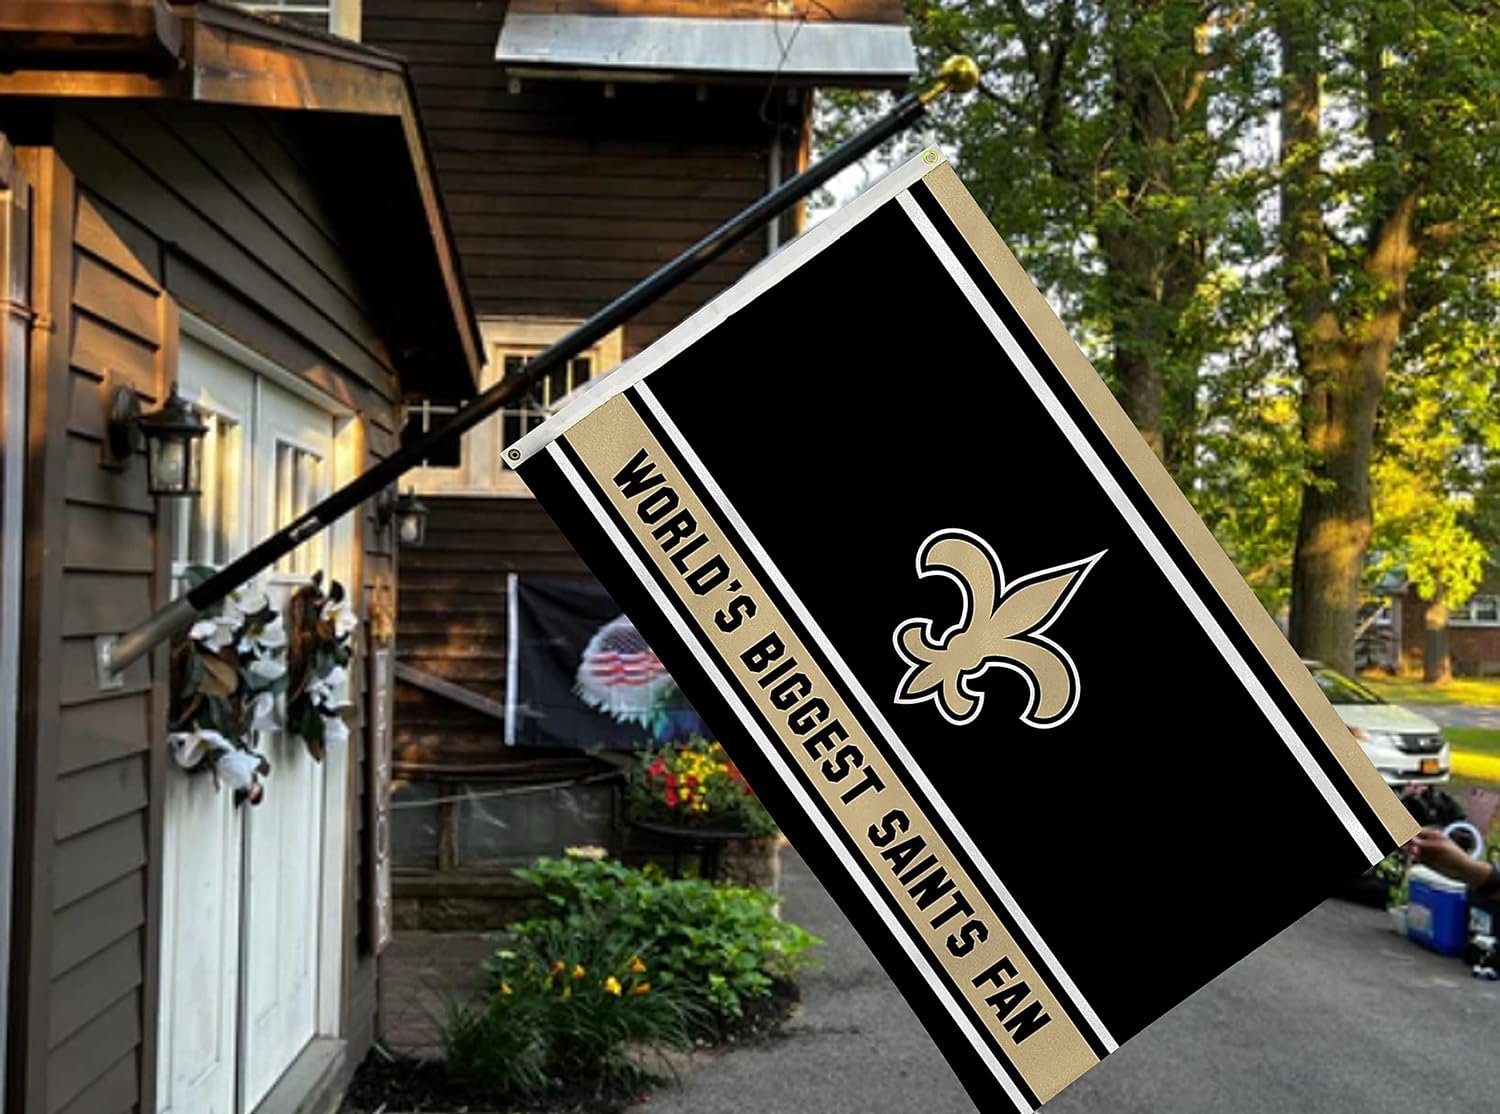 New Orleans Saints 3x5 Feet Flag Banner, World's Biggest Fan, Metal Grommets, Single Sided, Indoor or Outdoor Use